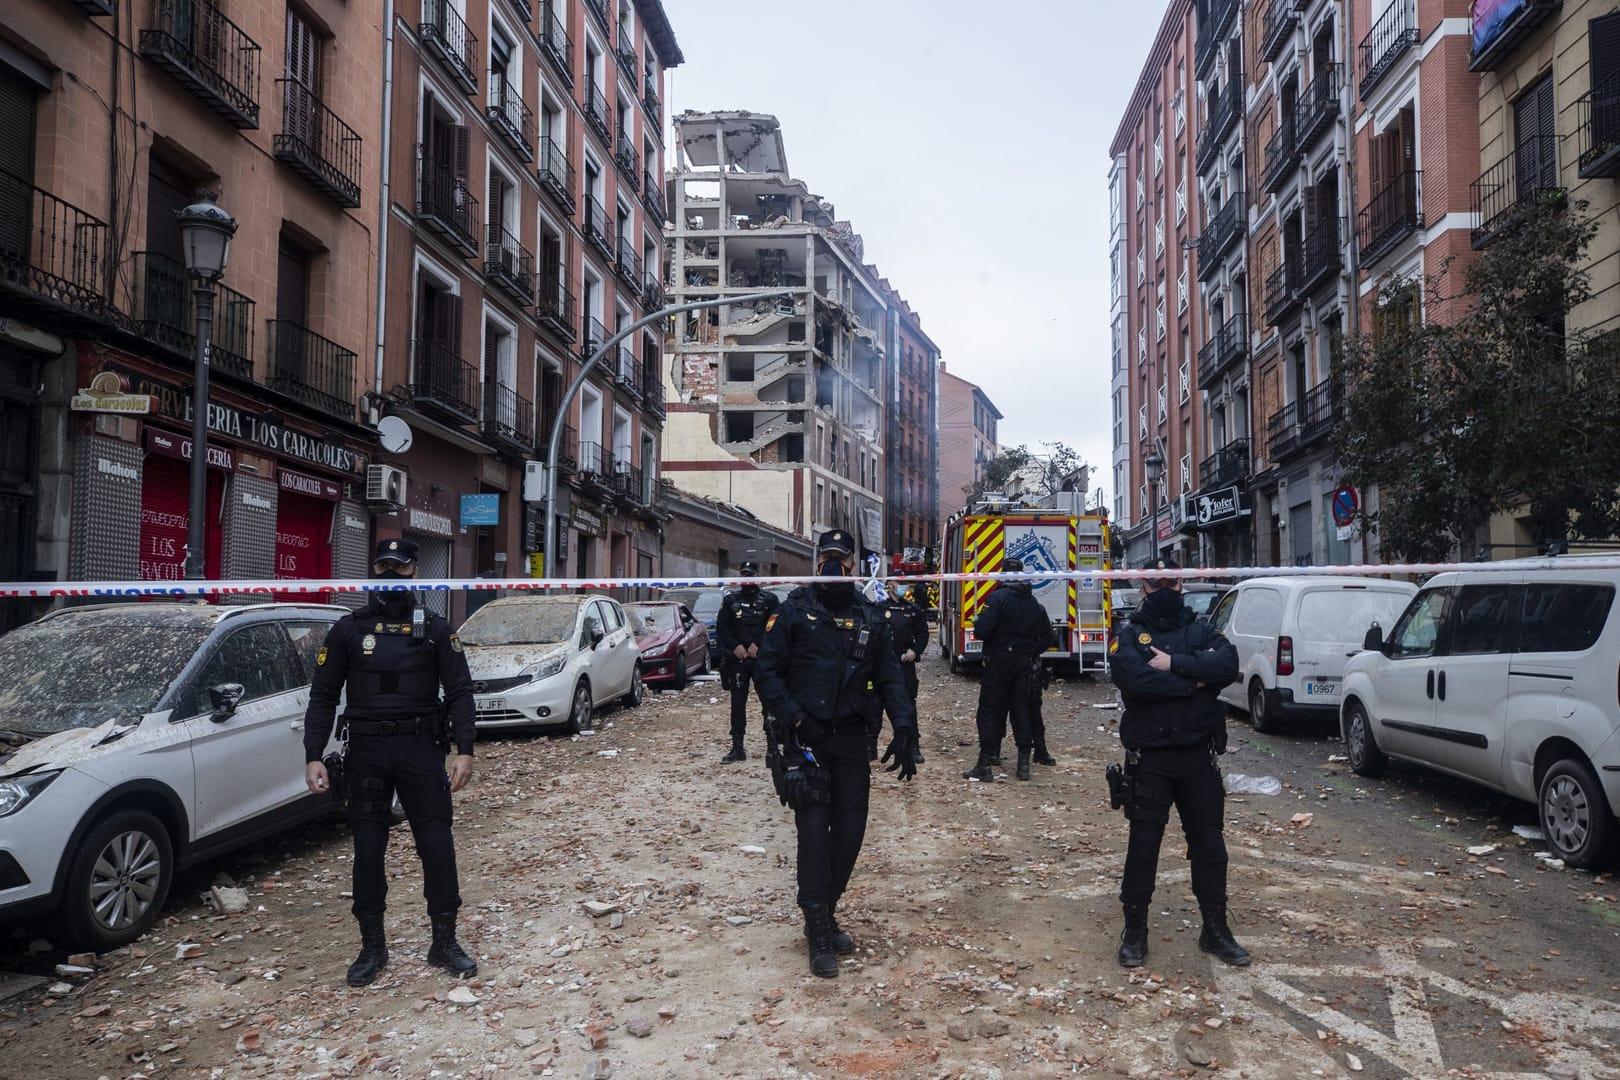 Gas explosion rips through Church-owned building in Madrid, killing 4